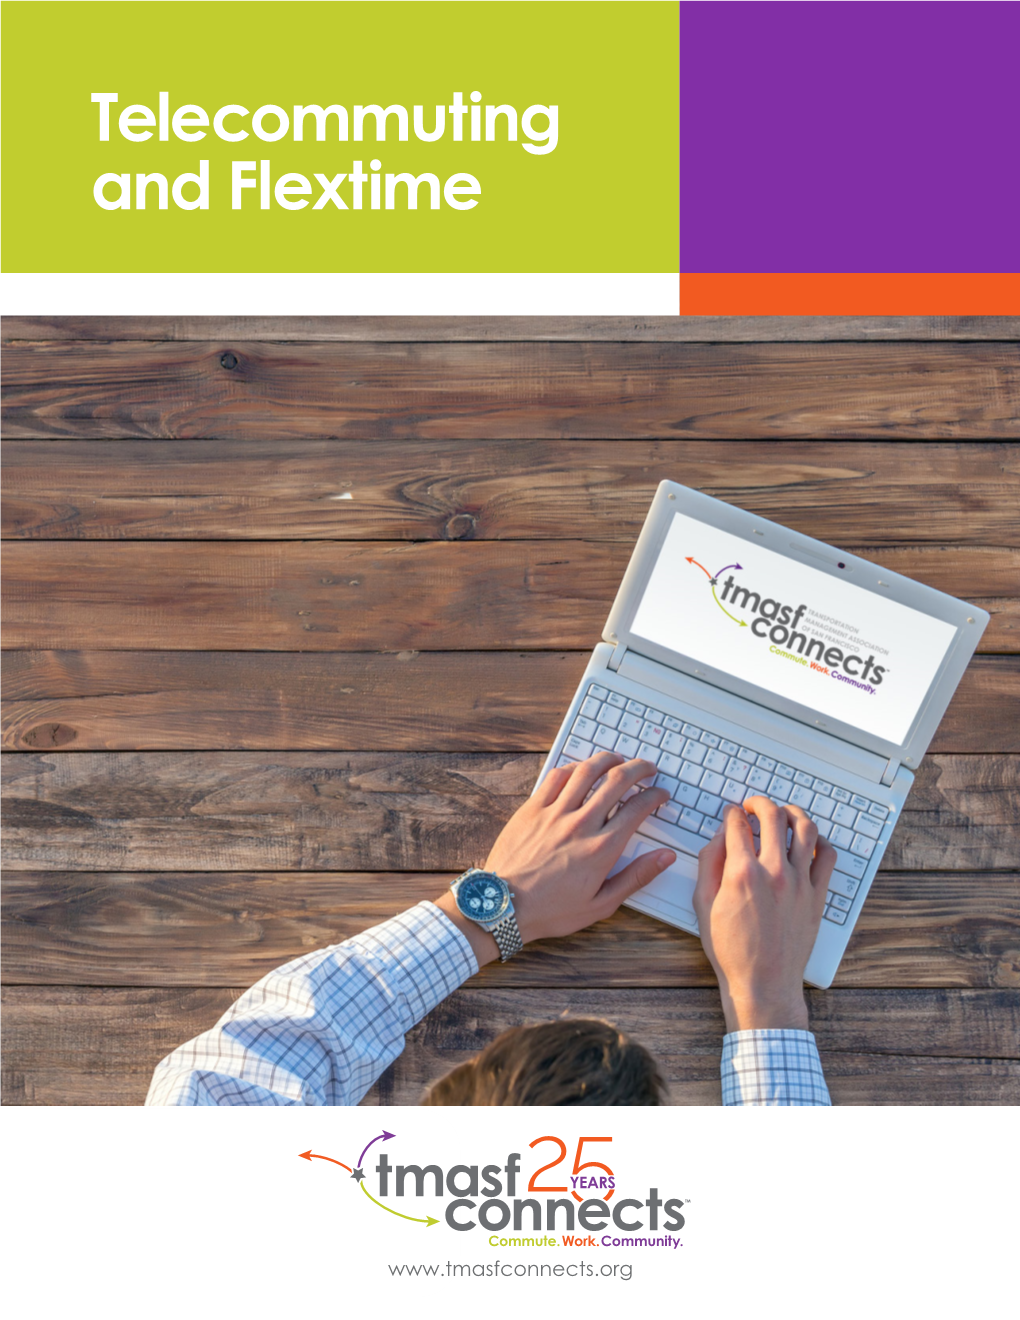 Telecommuting and Flextime